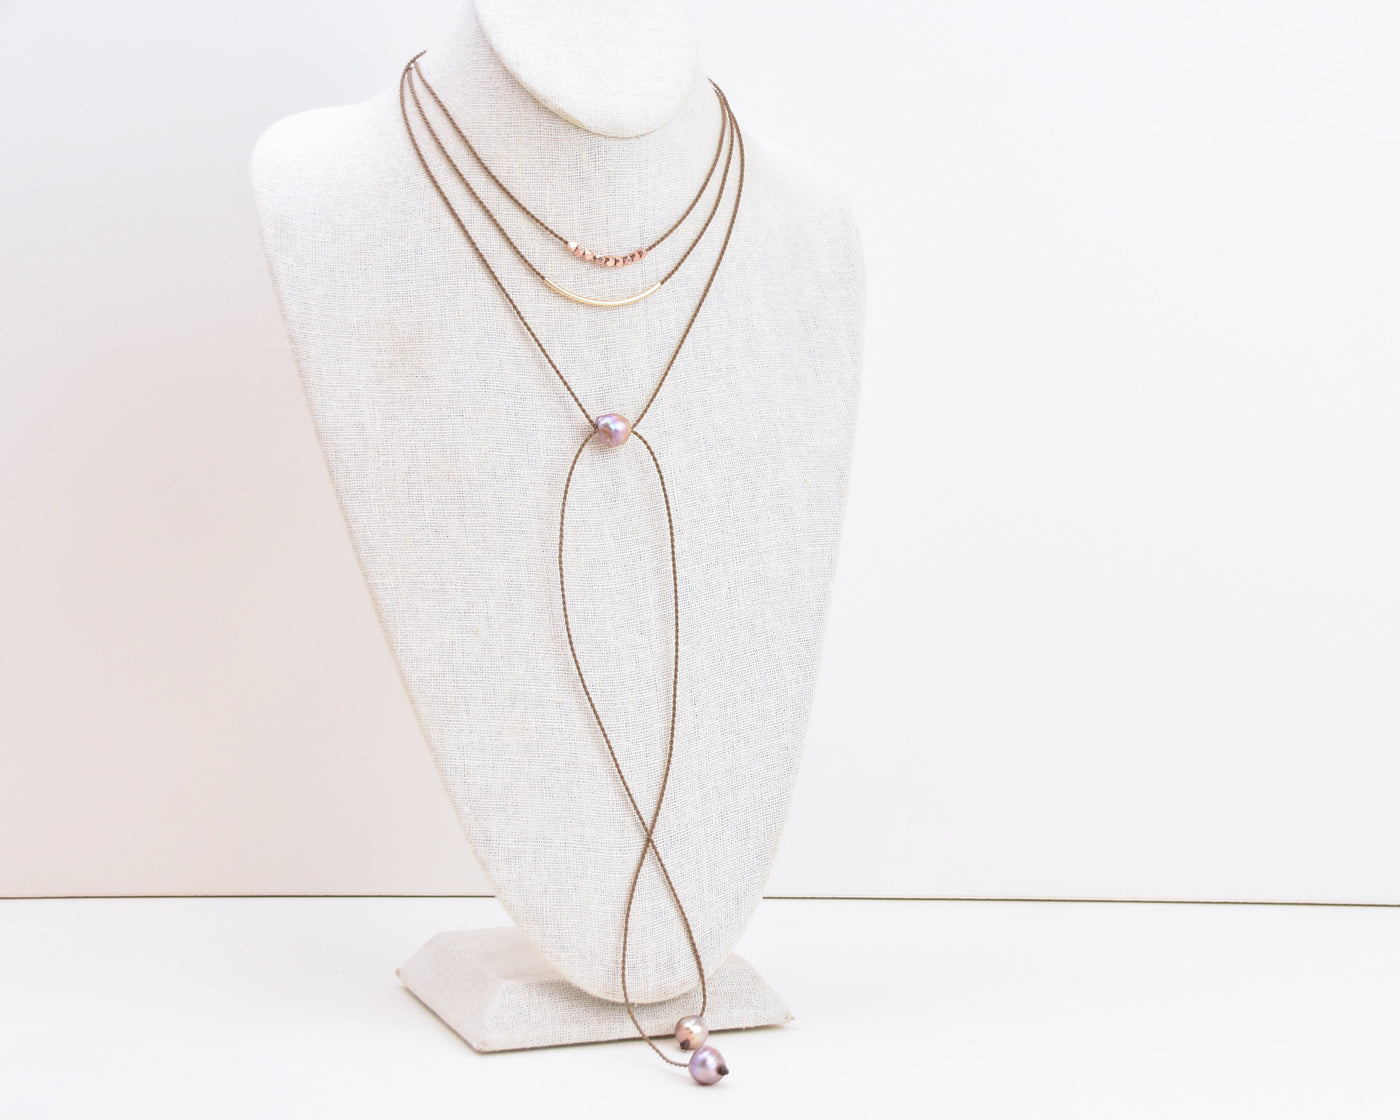 First Date - Necklace Stack (15% off)